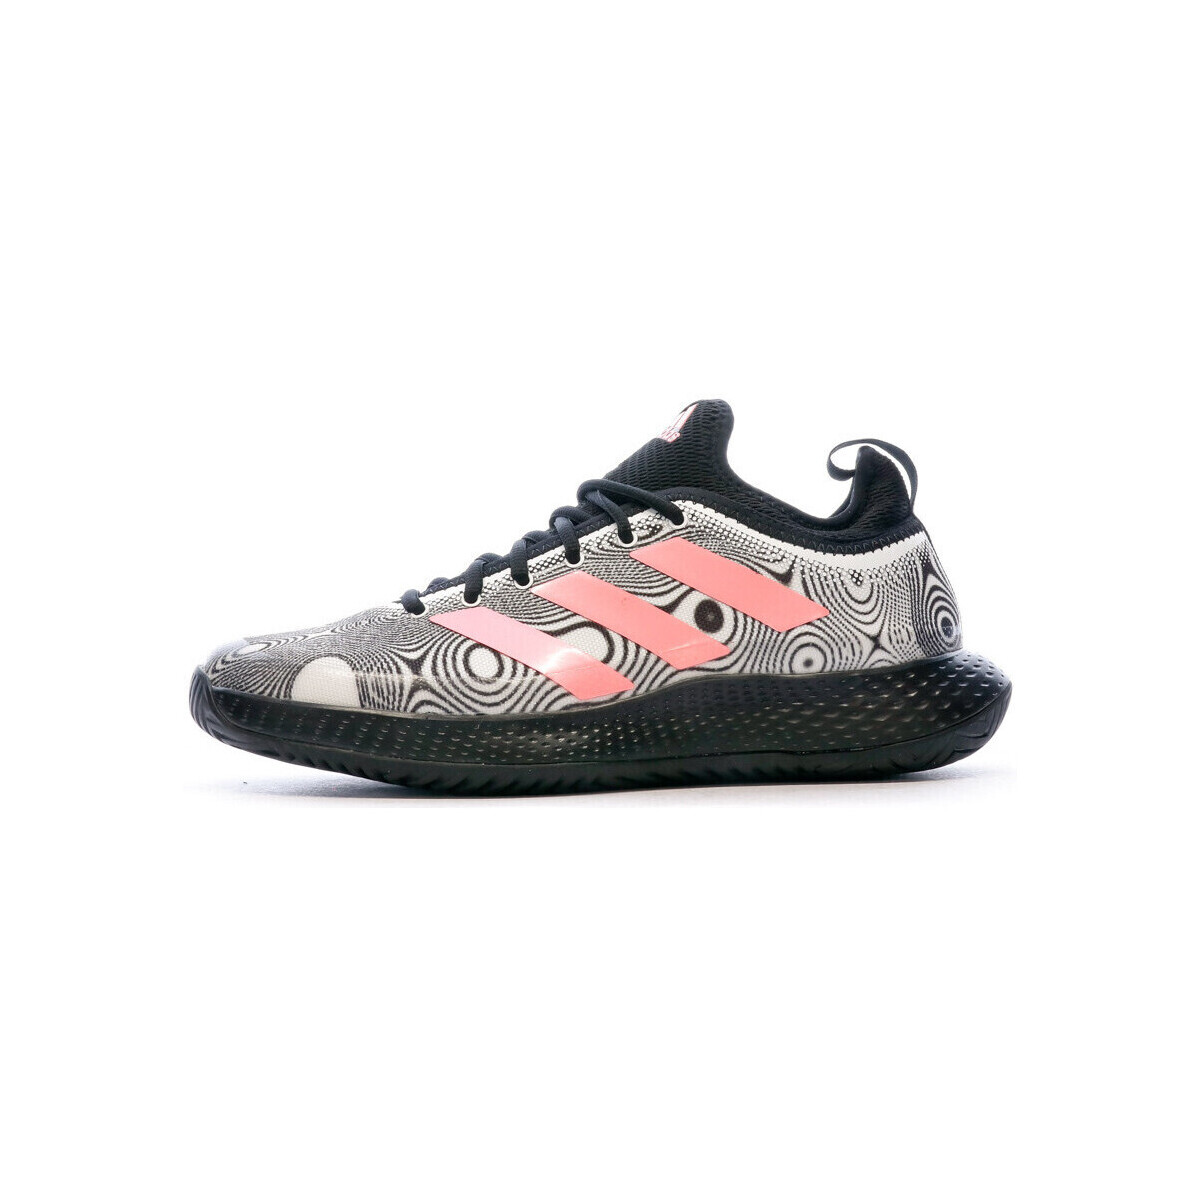 Sapatos Homem adidas fw8125 superstar 360 girls are awesome infant toddler lifestyle shoe white purple green coral  Preto